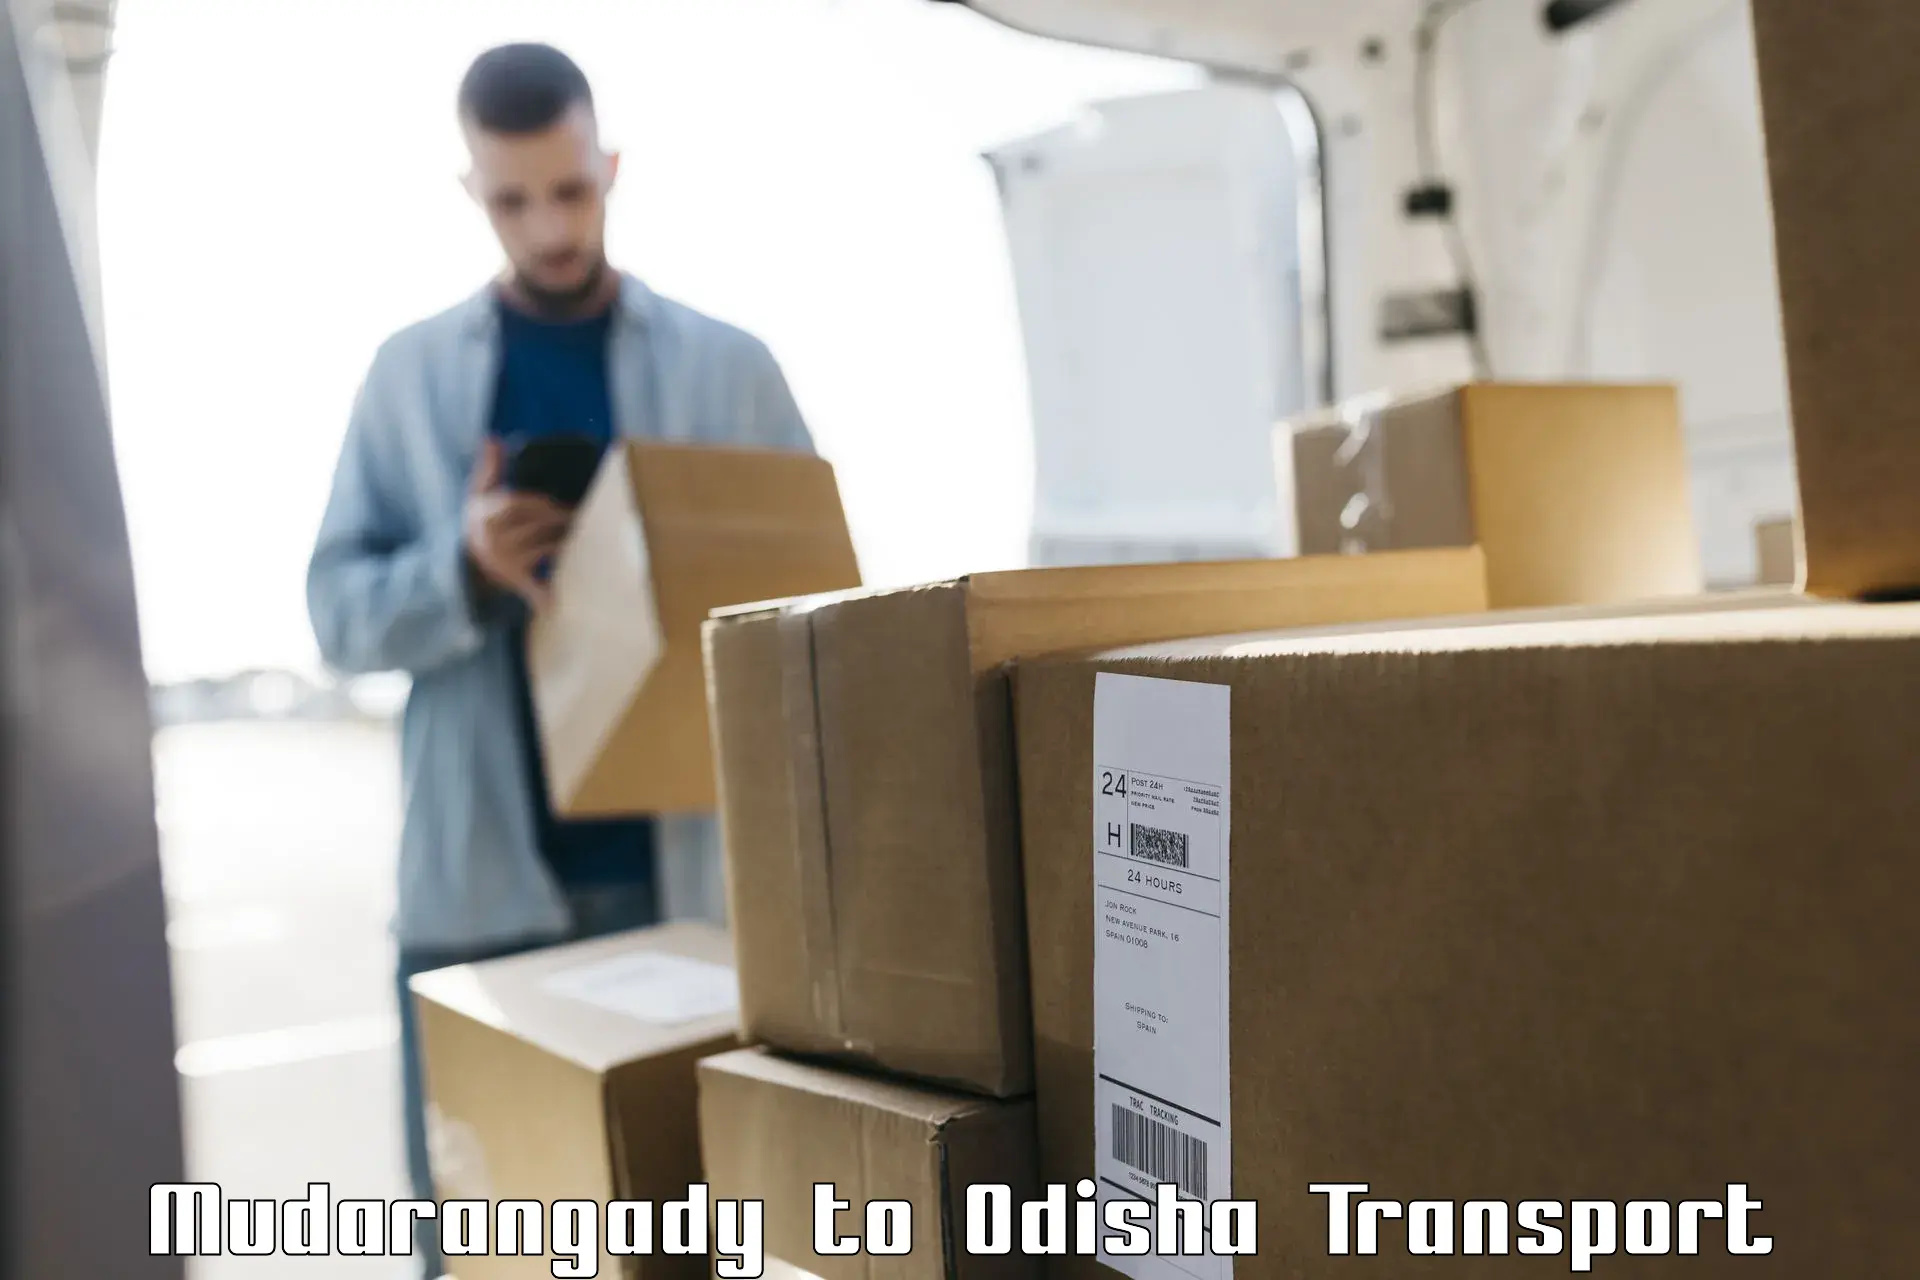 Part load transport service in India Mudarangady to Baliapal